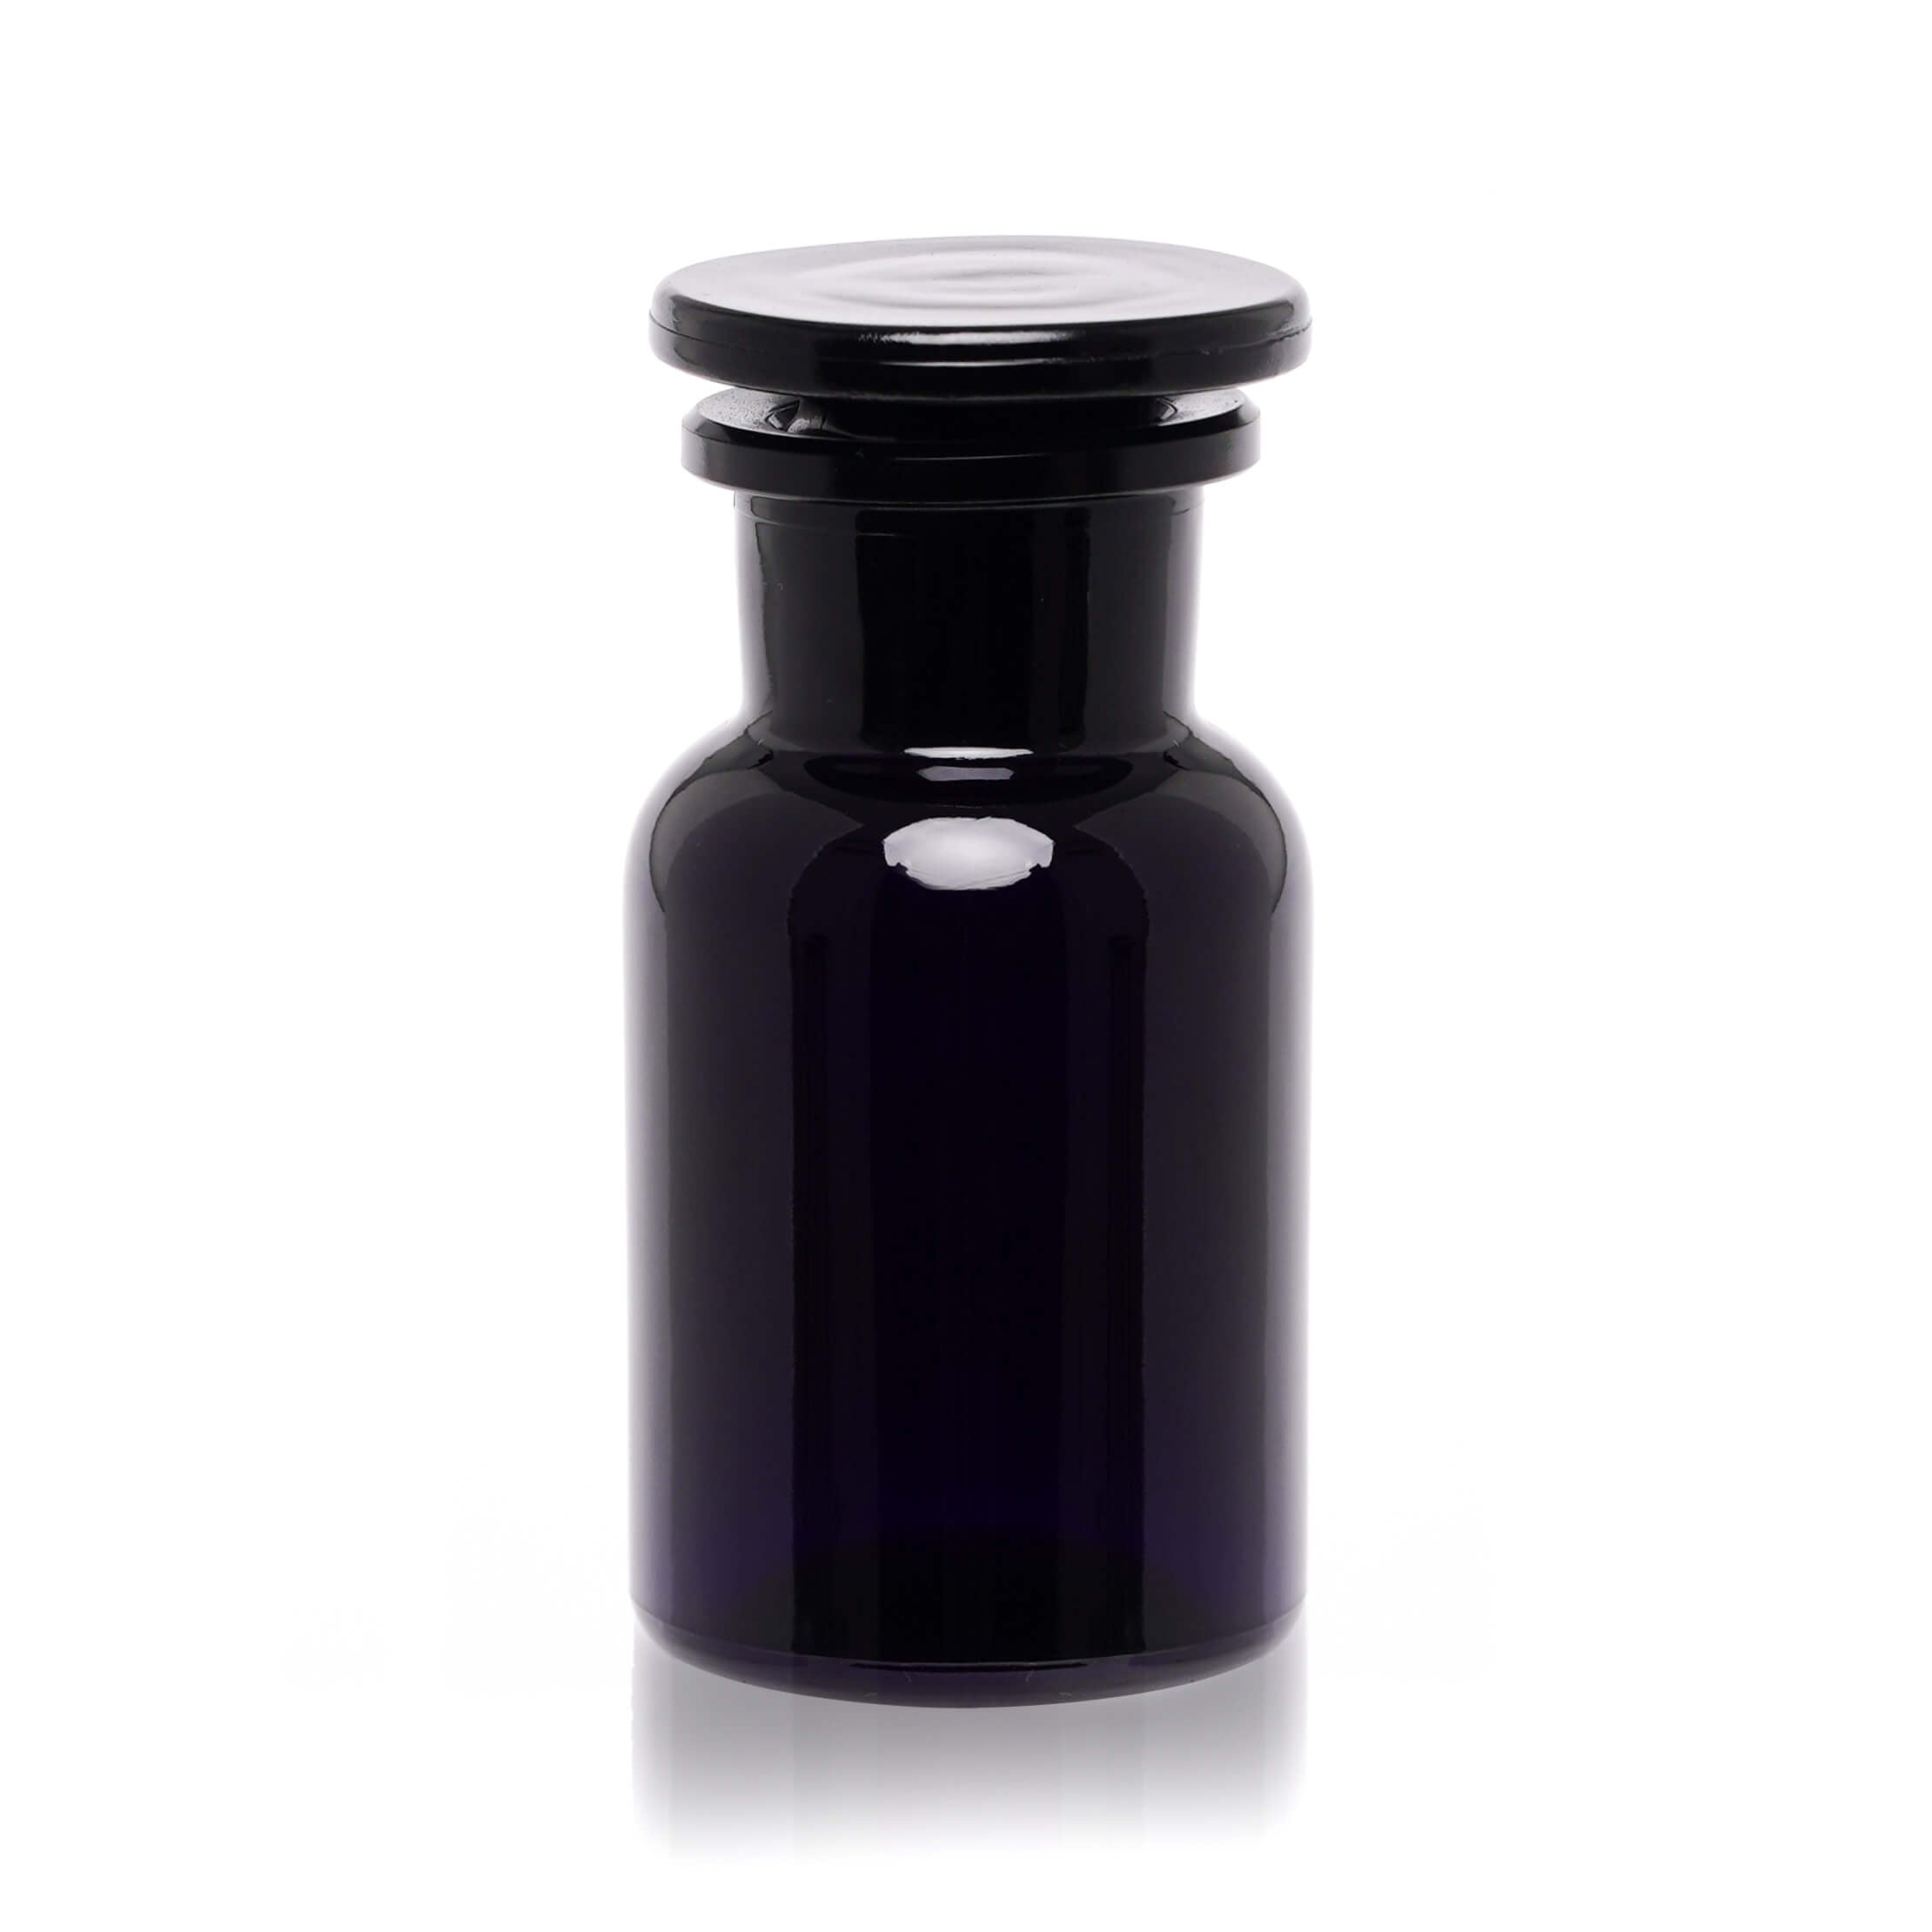 Infinity Jars 100 ml (3.38 fl oz) Black Ultraviolet Covered Glass Dish with Glass Lid 3-Pack, Size: One Size